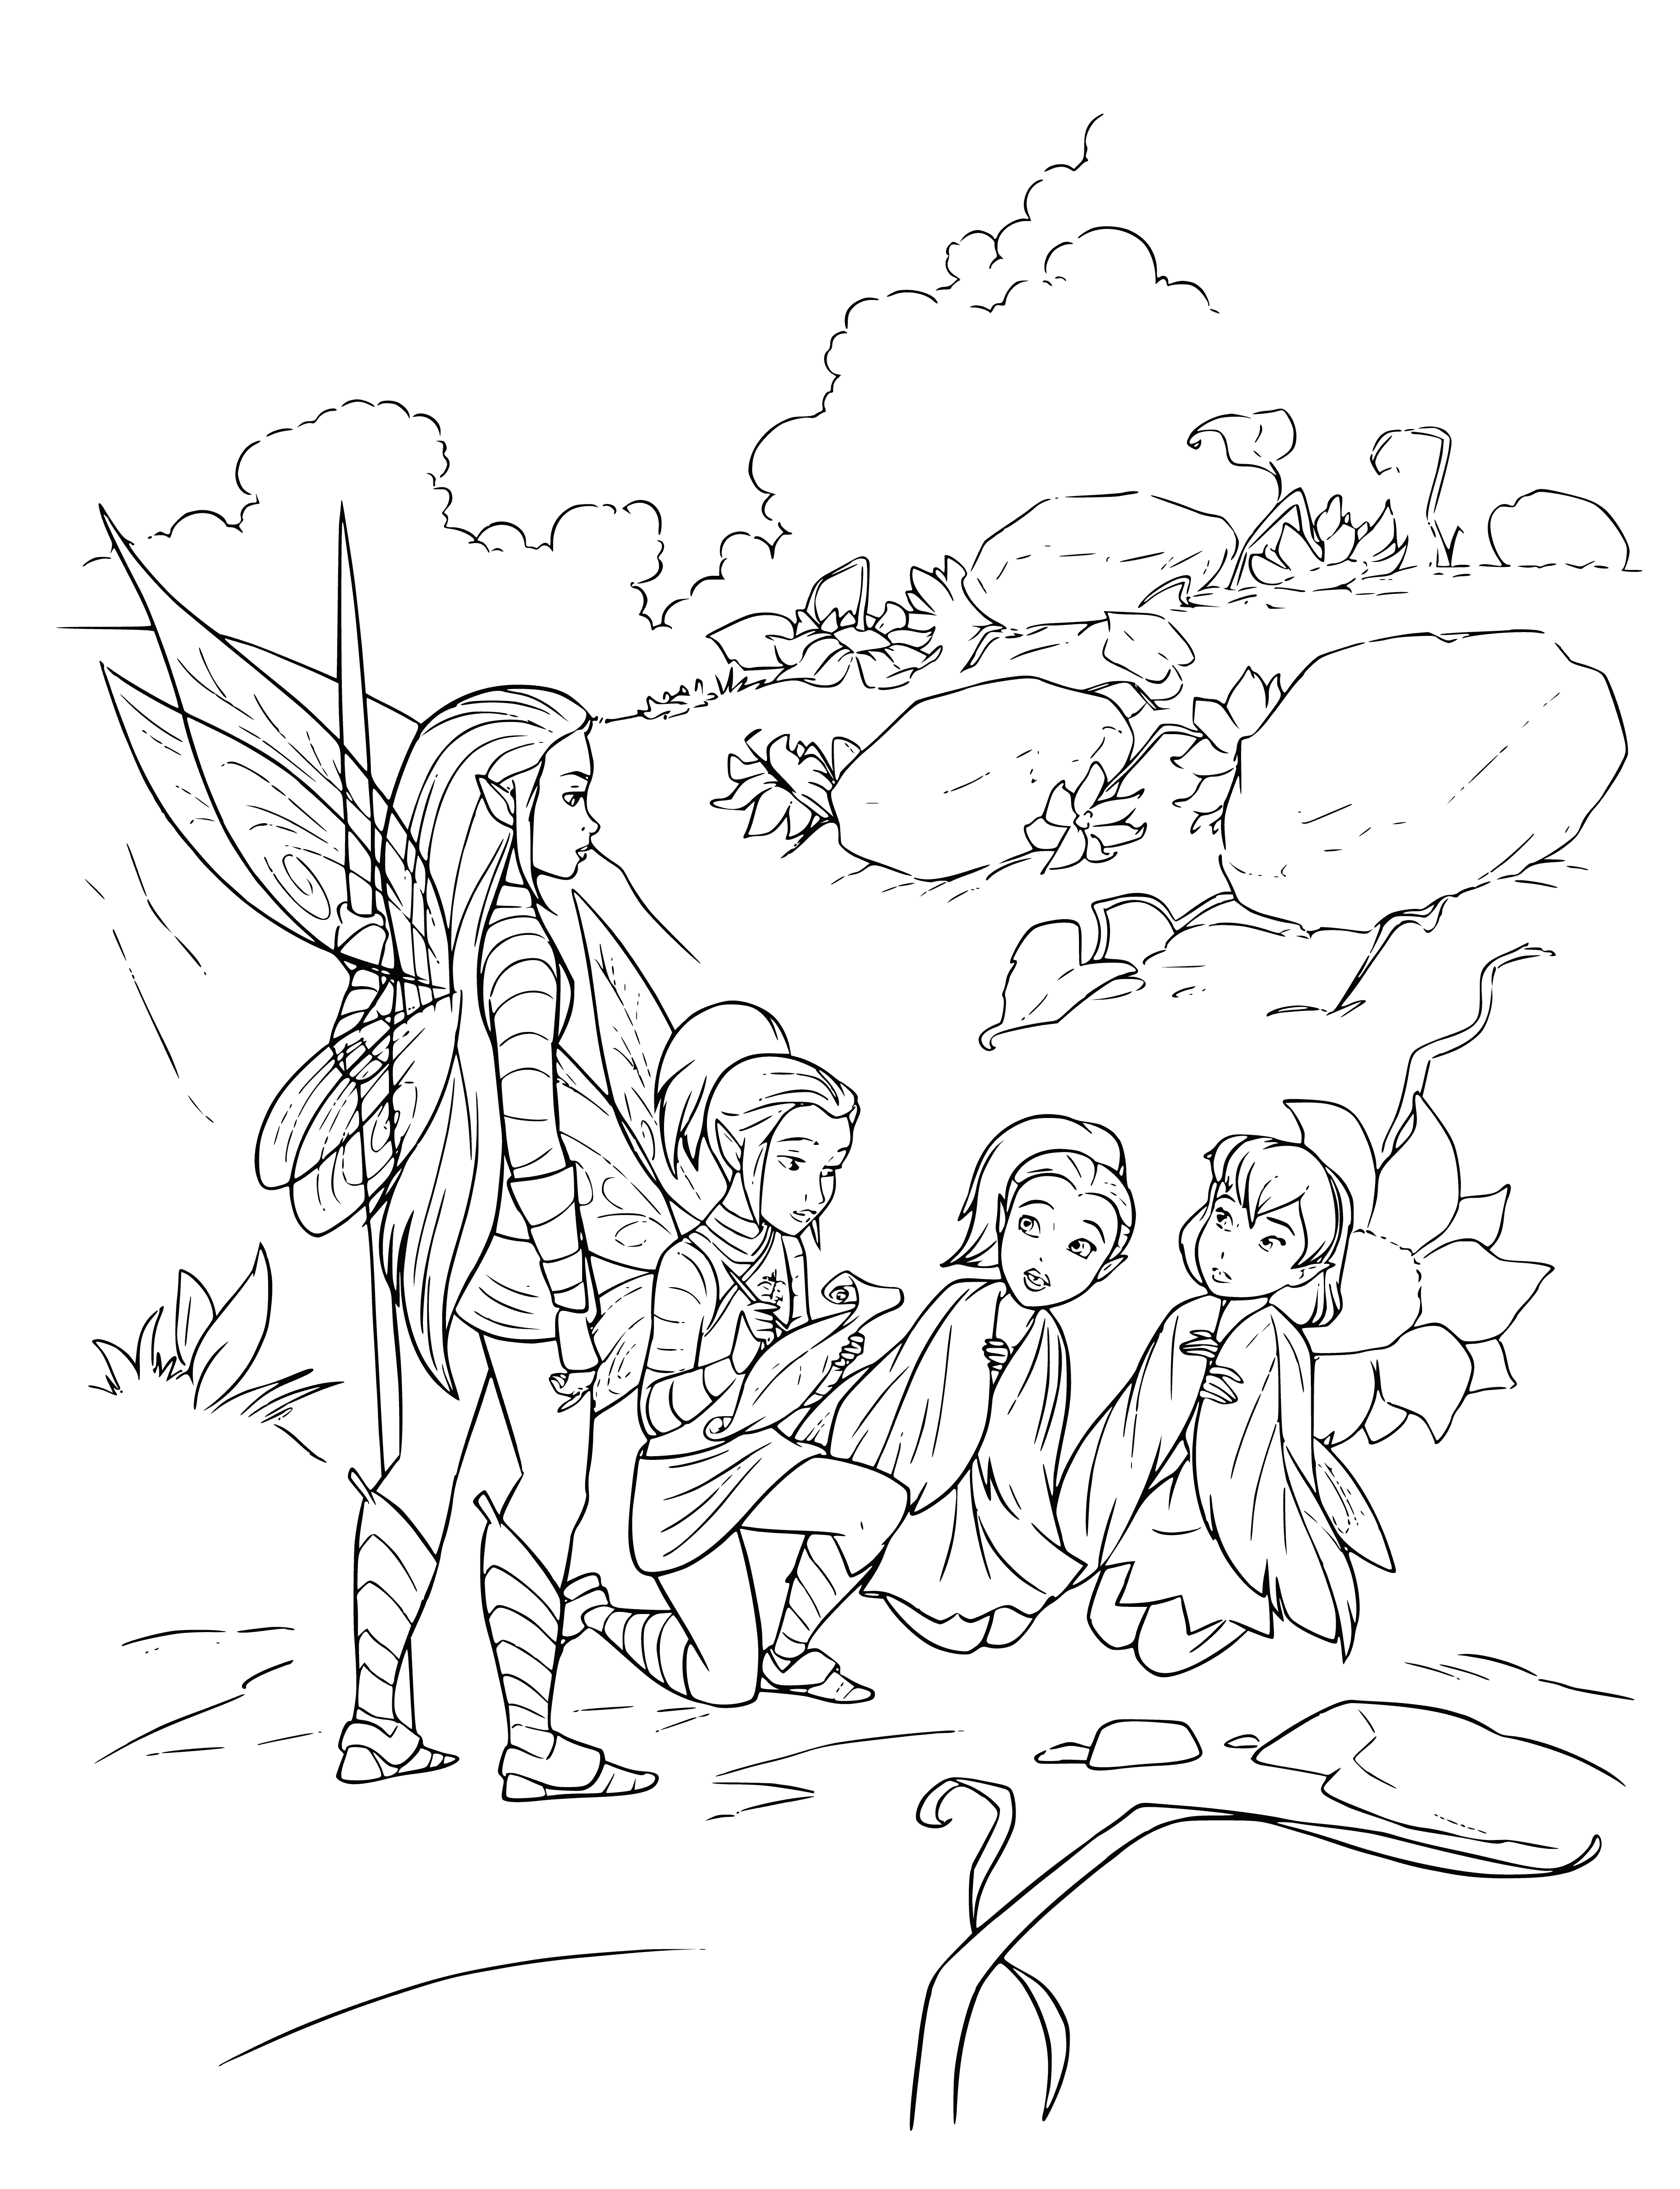 Nyx gathers information coloring page